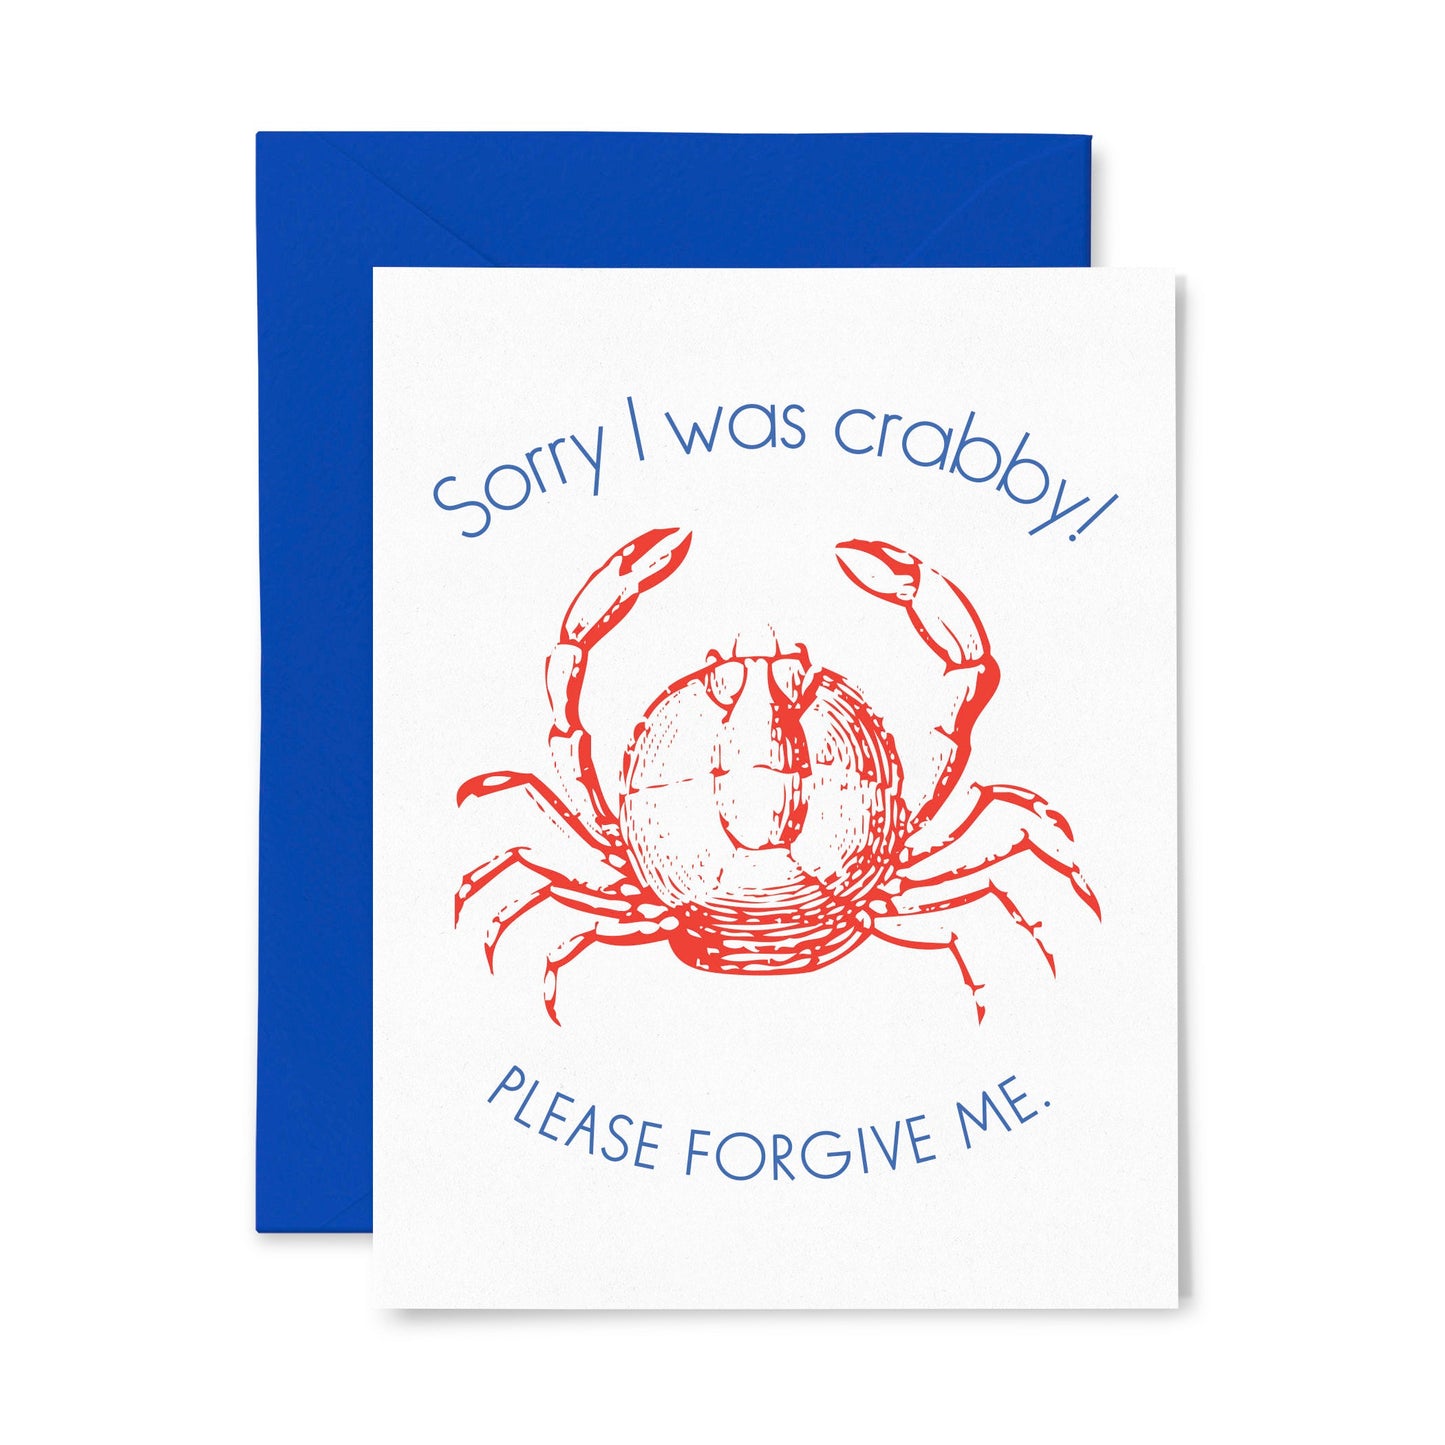 By Color Box Design & Letterpress. Sometimes you just need to say you're sorry, this cute little crabby card is the perfect way! Sorry I Was Crabby Card details: Letterpress folded card, blank inside. 1 ply paper with deep impression. A2 size (4.125" x 5.5"). Comes with envelope shown in a clear sleeve.